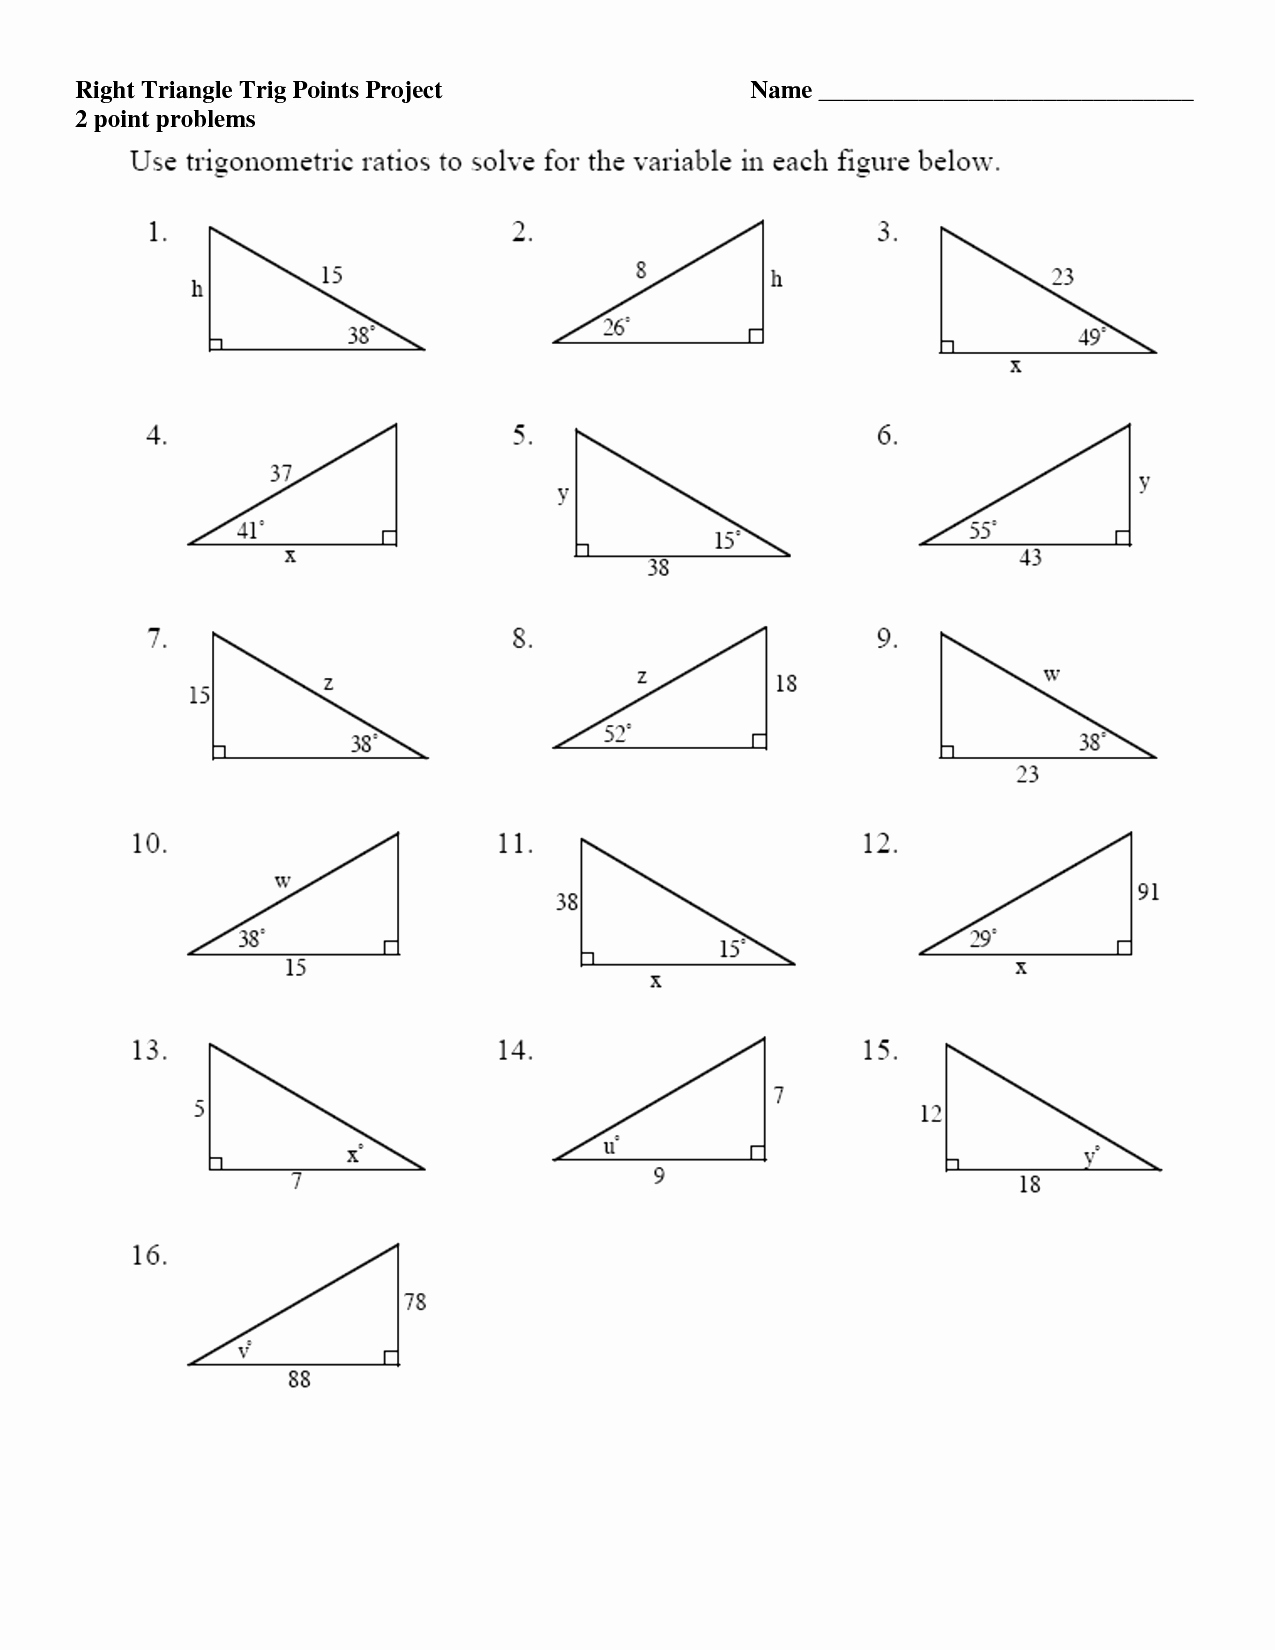 Right Triangle Trig Worksheet Answers Best Of Trigonometry Ratios In Right Triangles Worksheet the Best